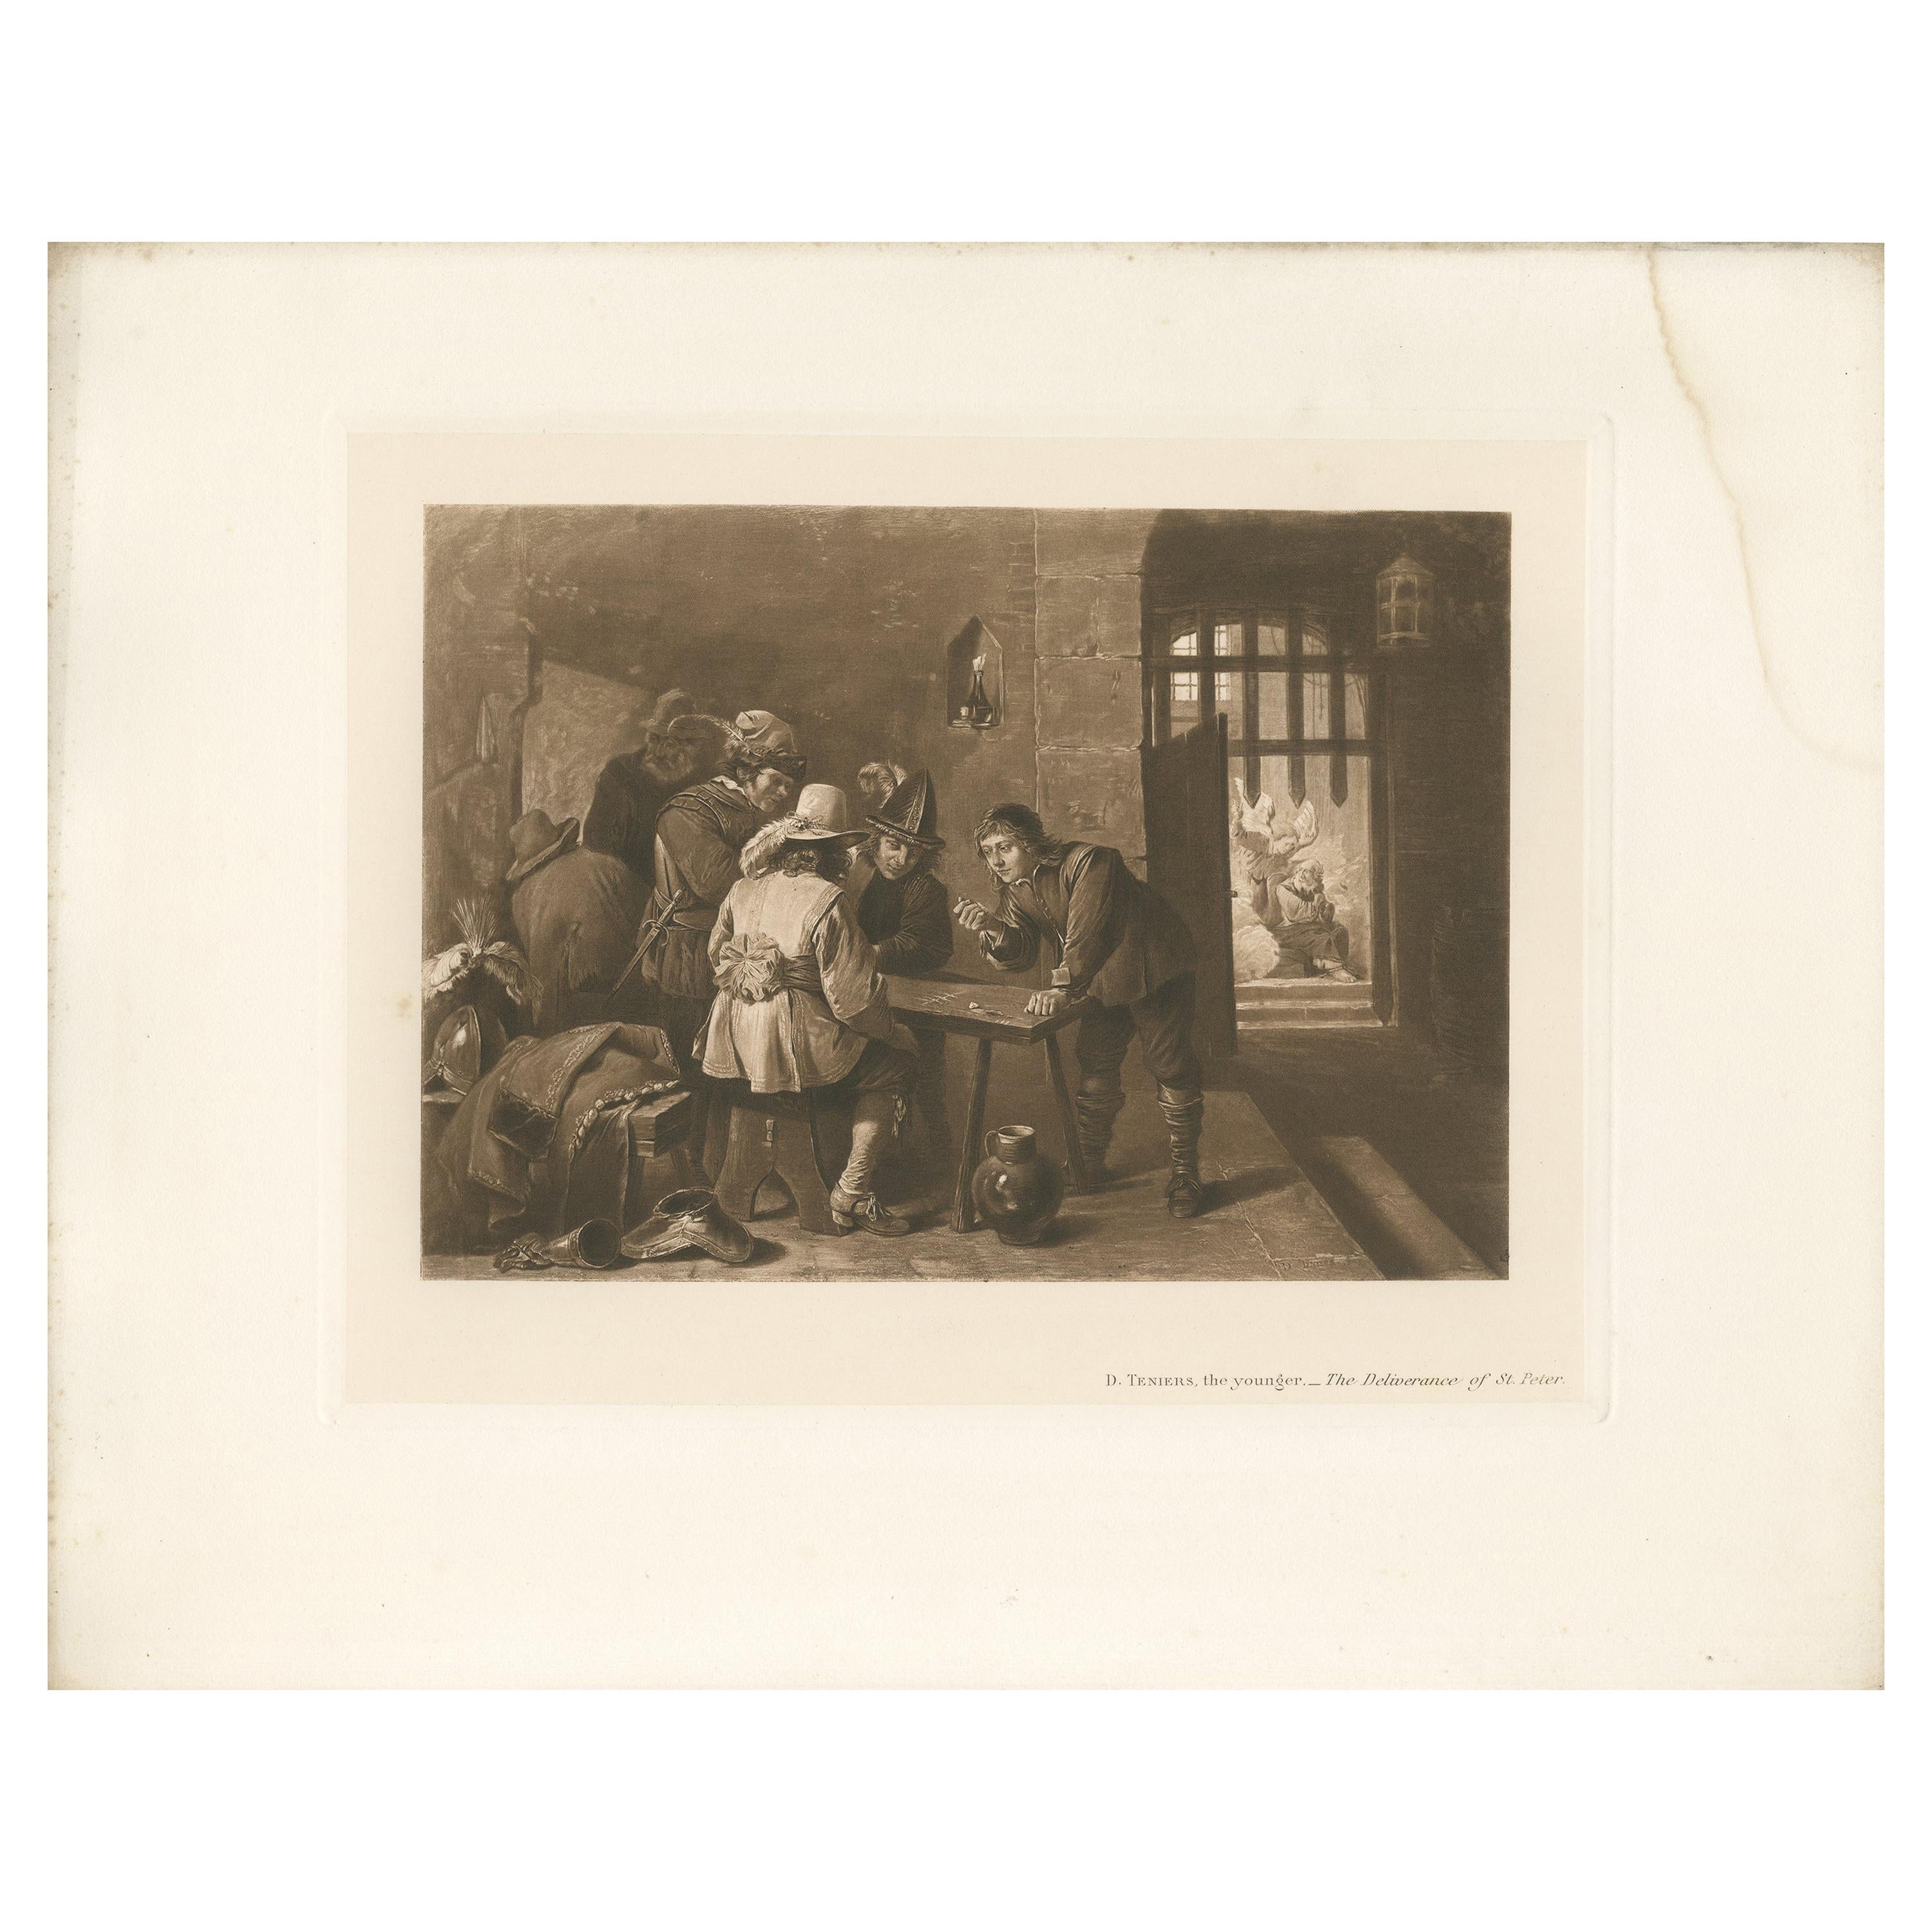 Antique Print of 'The Deliverance of St. Peter' made after D. Teniers (1902)